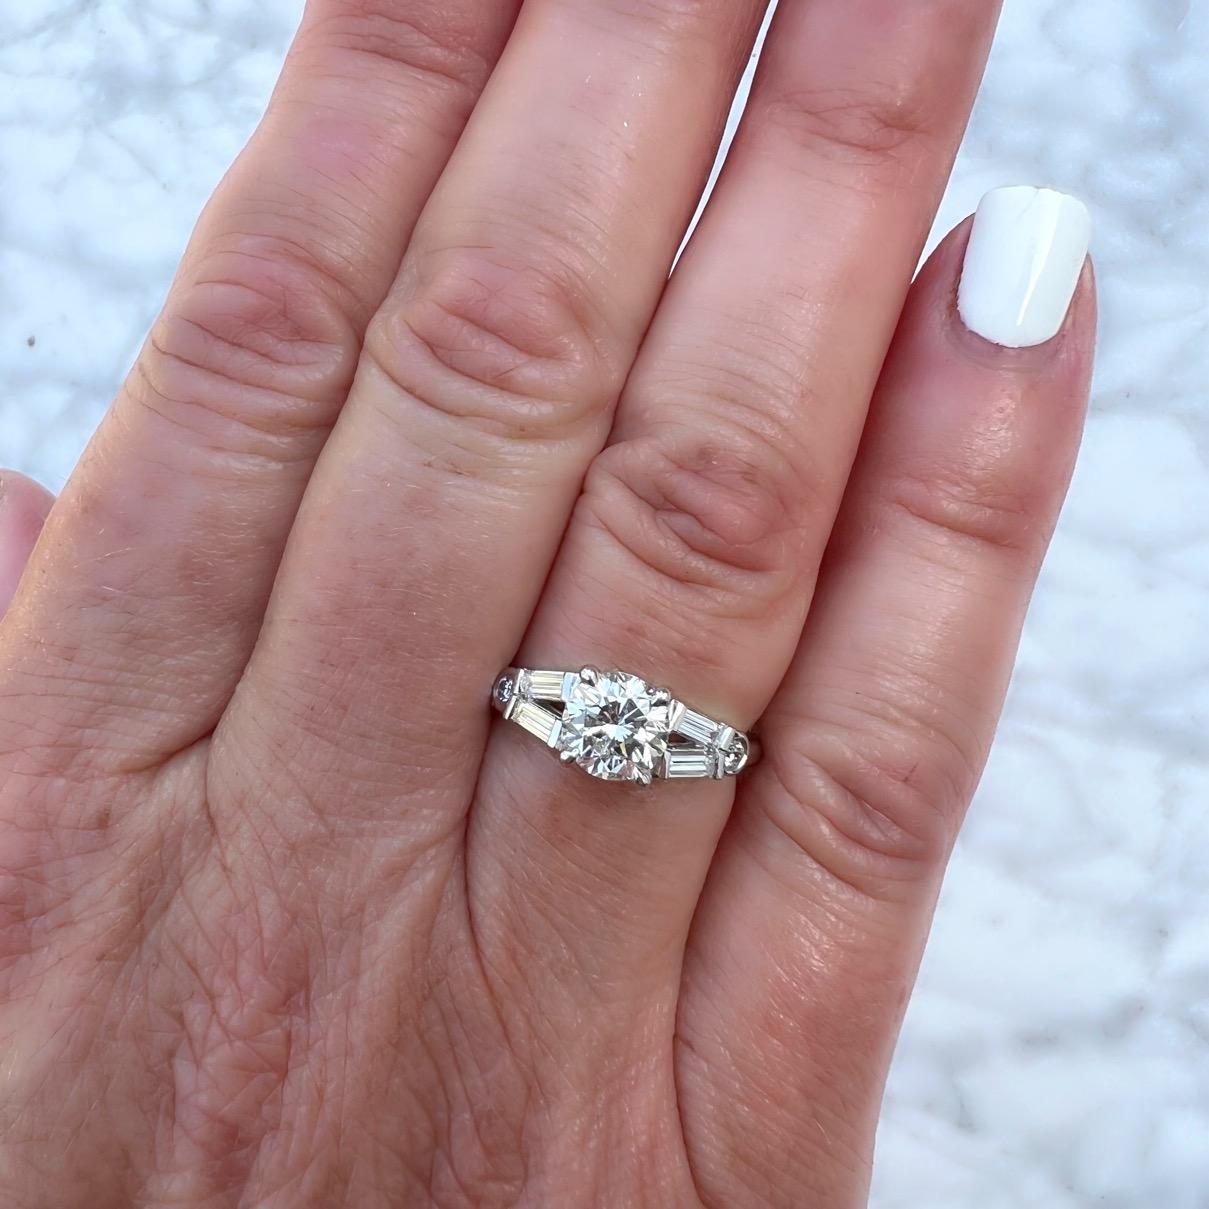 Look no further! This platinum diamond engagement ring might just be exactly what you were searching for. Featuring a fantastic 1.17 carat H/VVS2 round brilliant cut diamond as its centerpiece, this platinum stunner is highlighted by a split shank